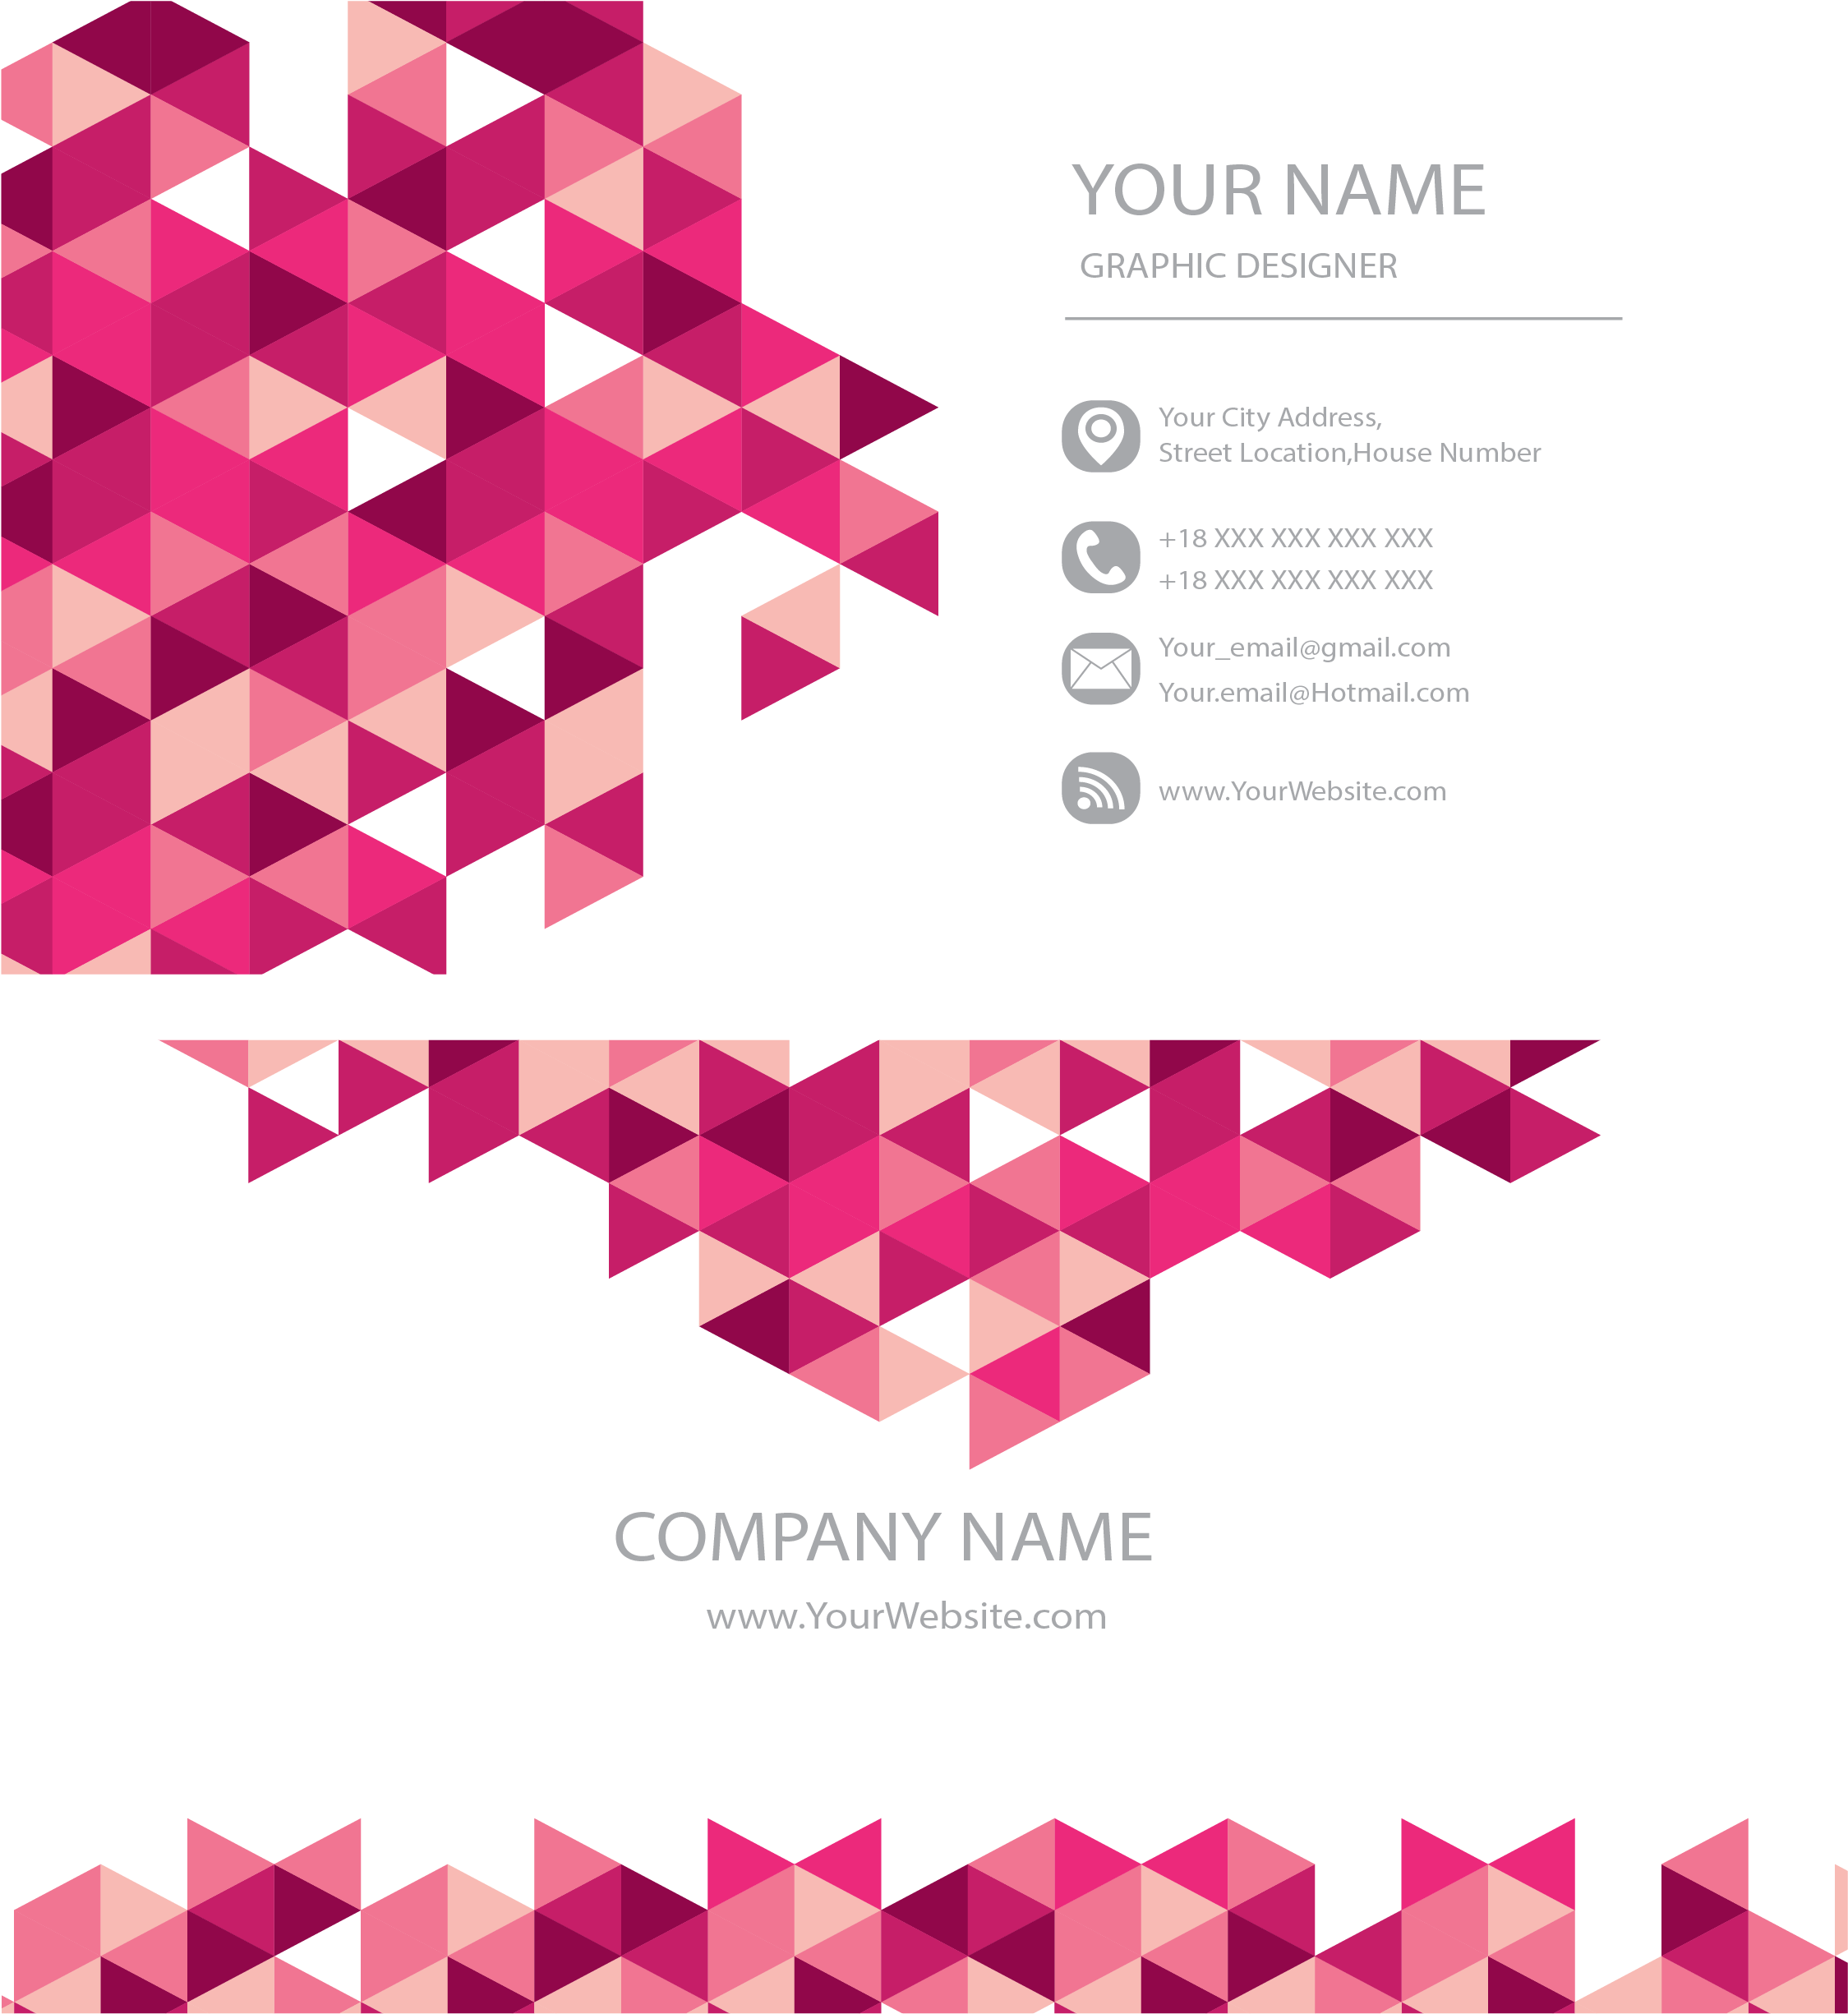 Abstract Geometric Business Card Design